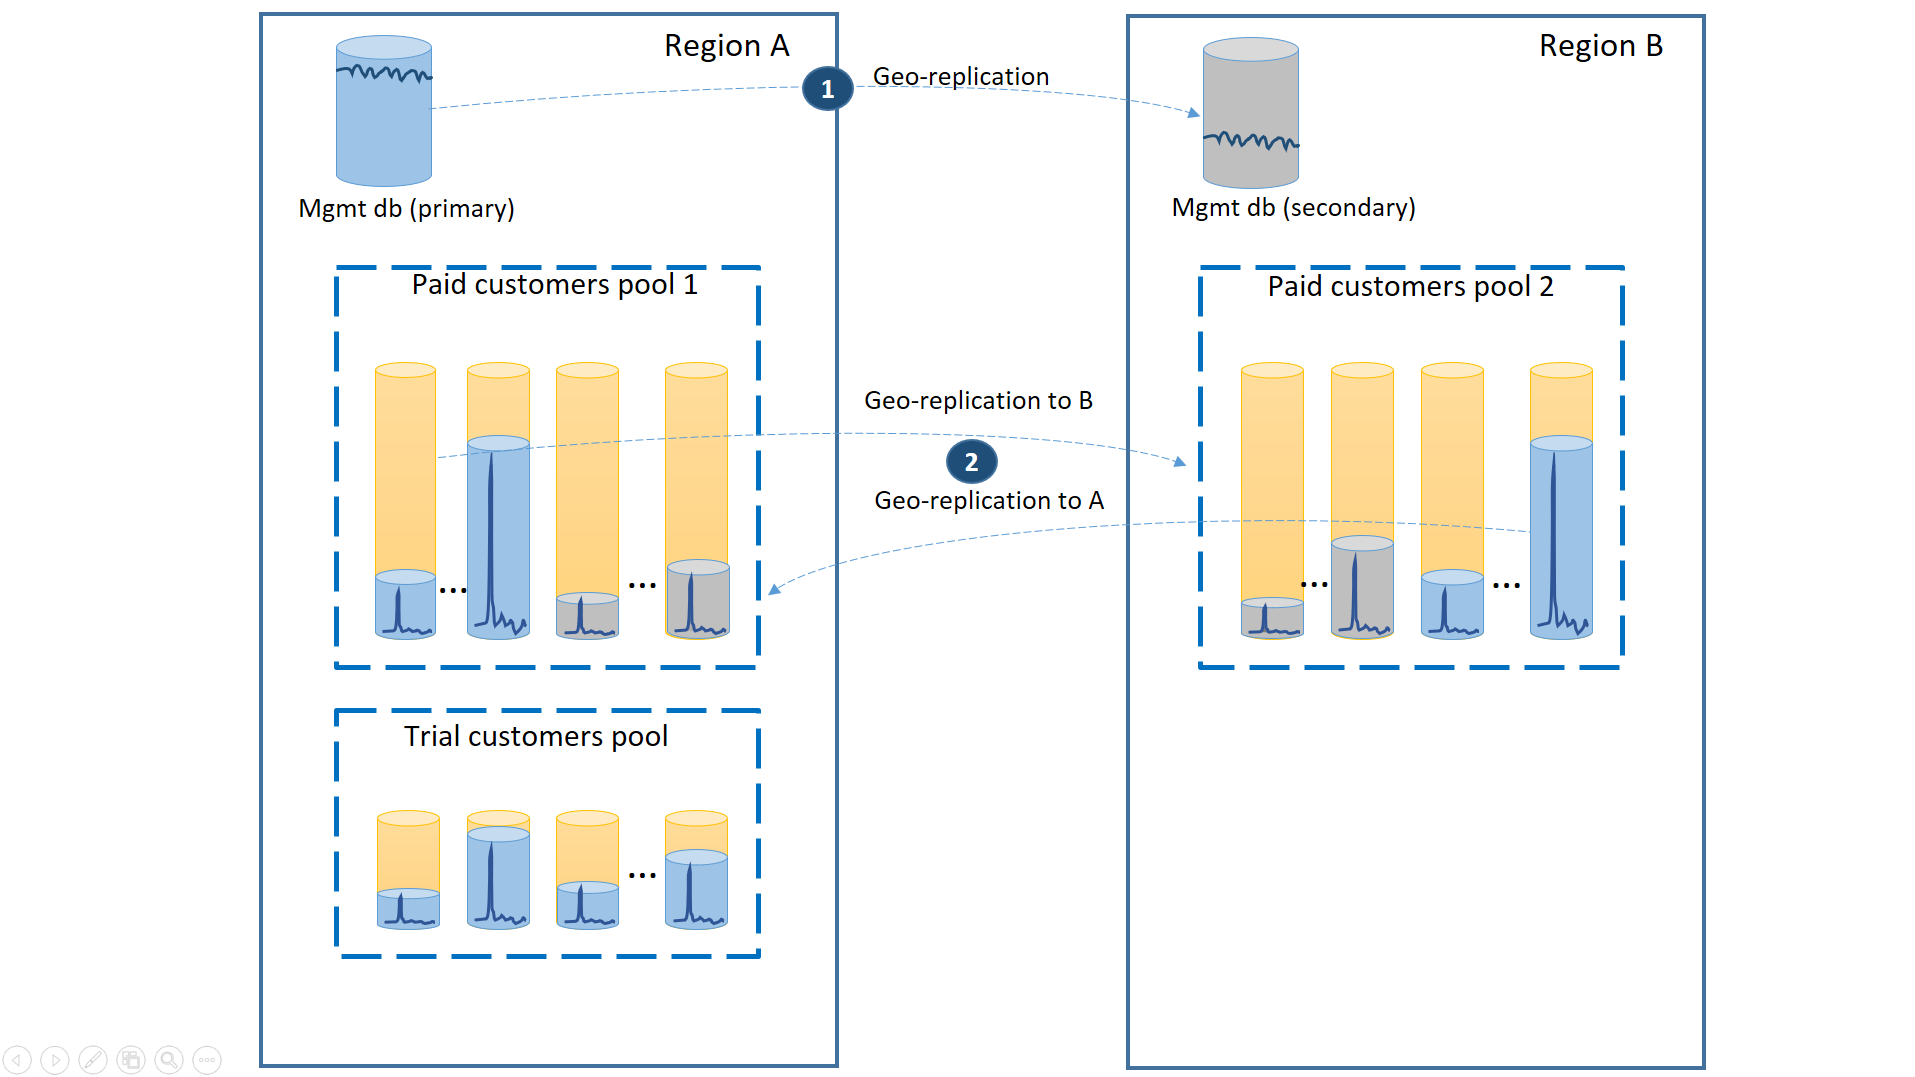 Diagram shows a primary region called Region A and secondary region called Region B which employ geo-replication between the management database and paid customers primary pool and secondary pool with no replication for the trial customers pool.